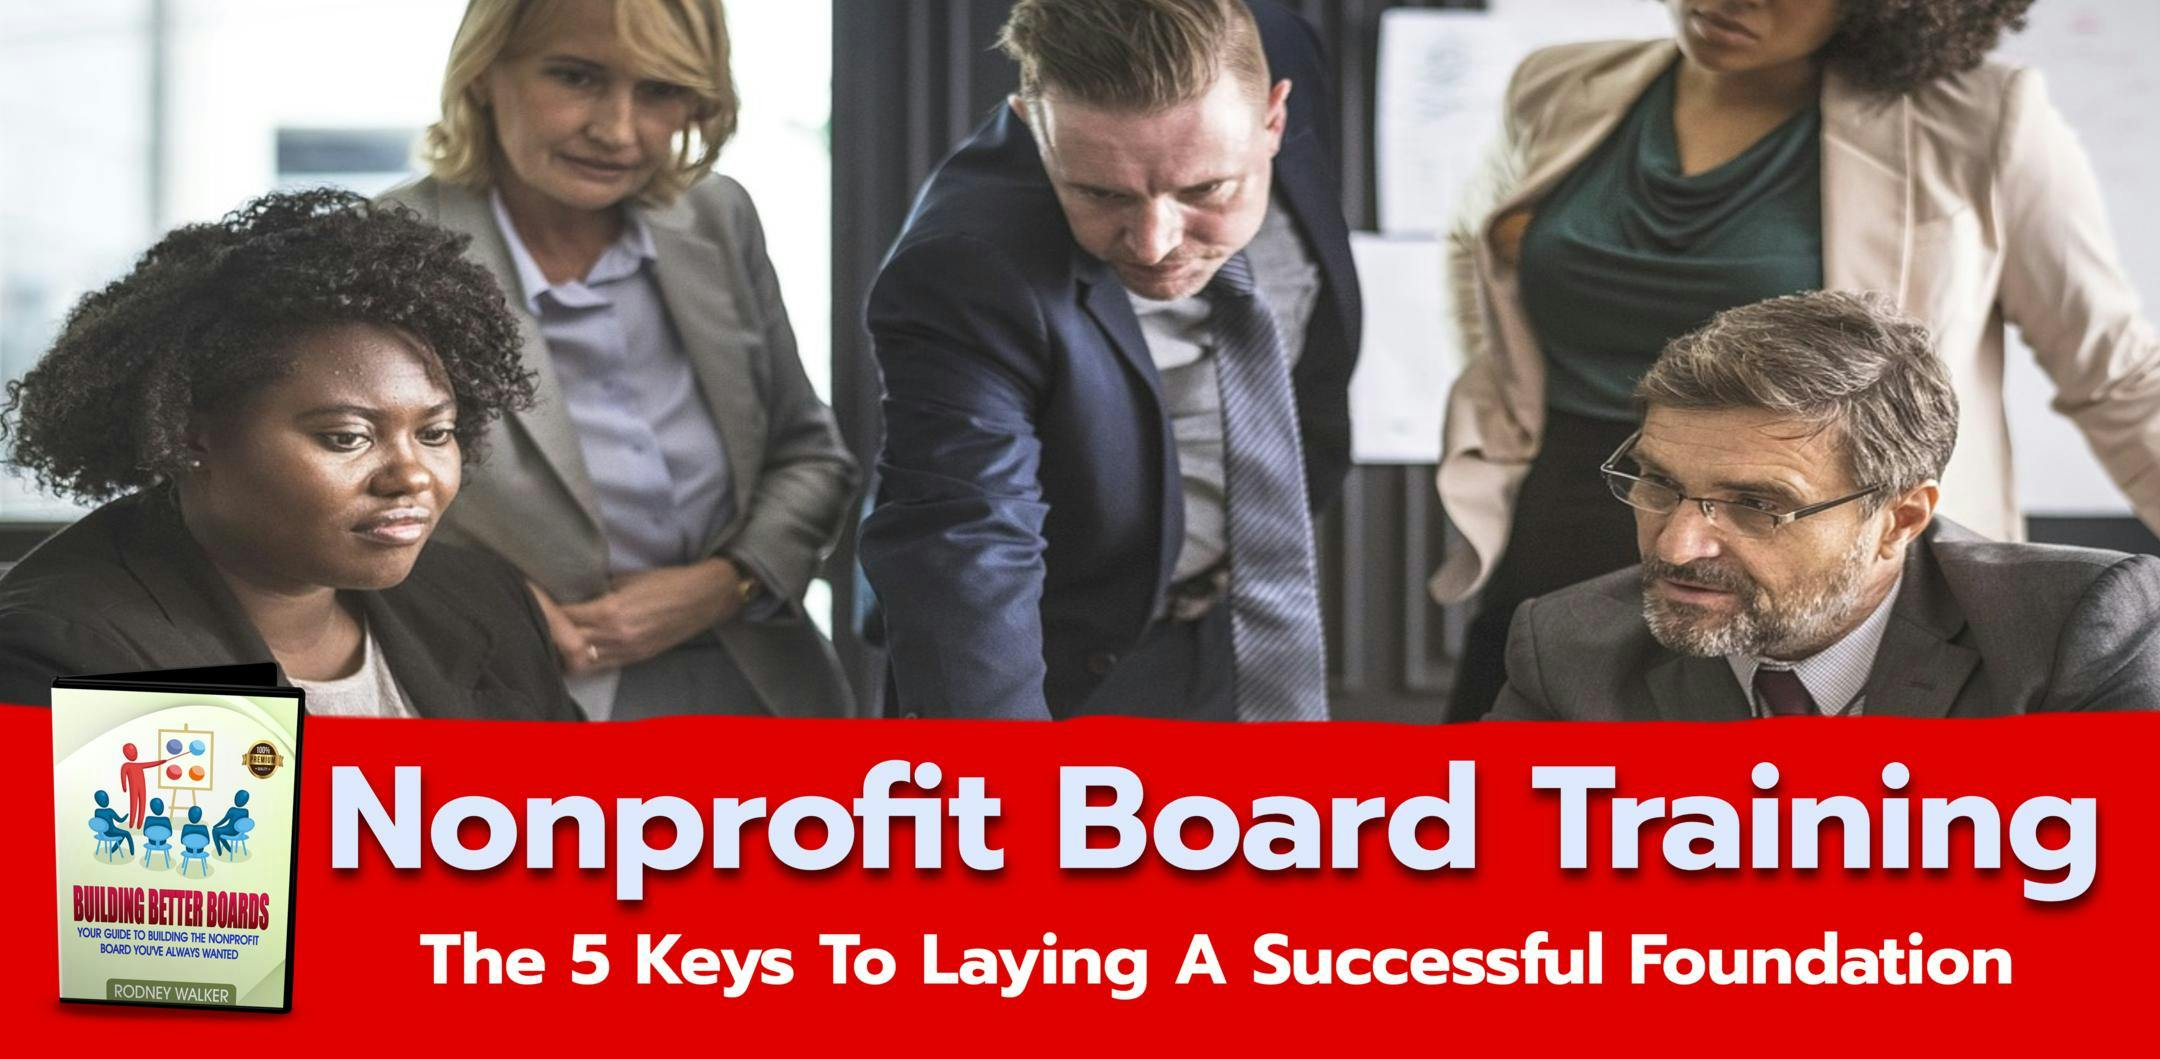 How To Build a Successful Nonprofit Board - Lakewood, Colorado